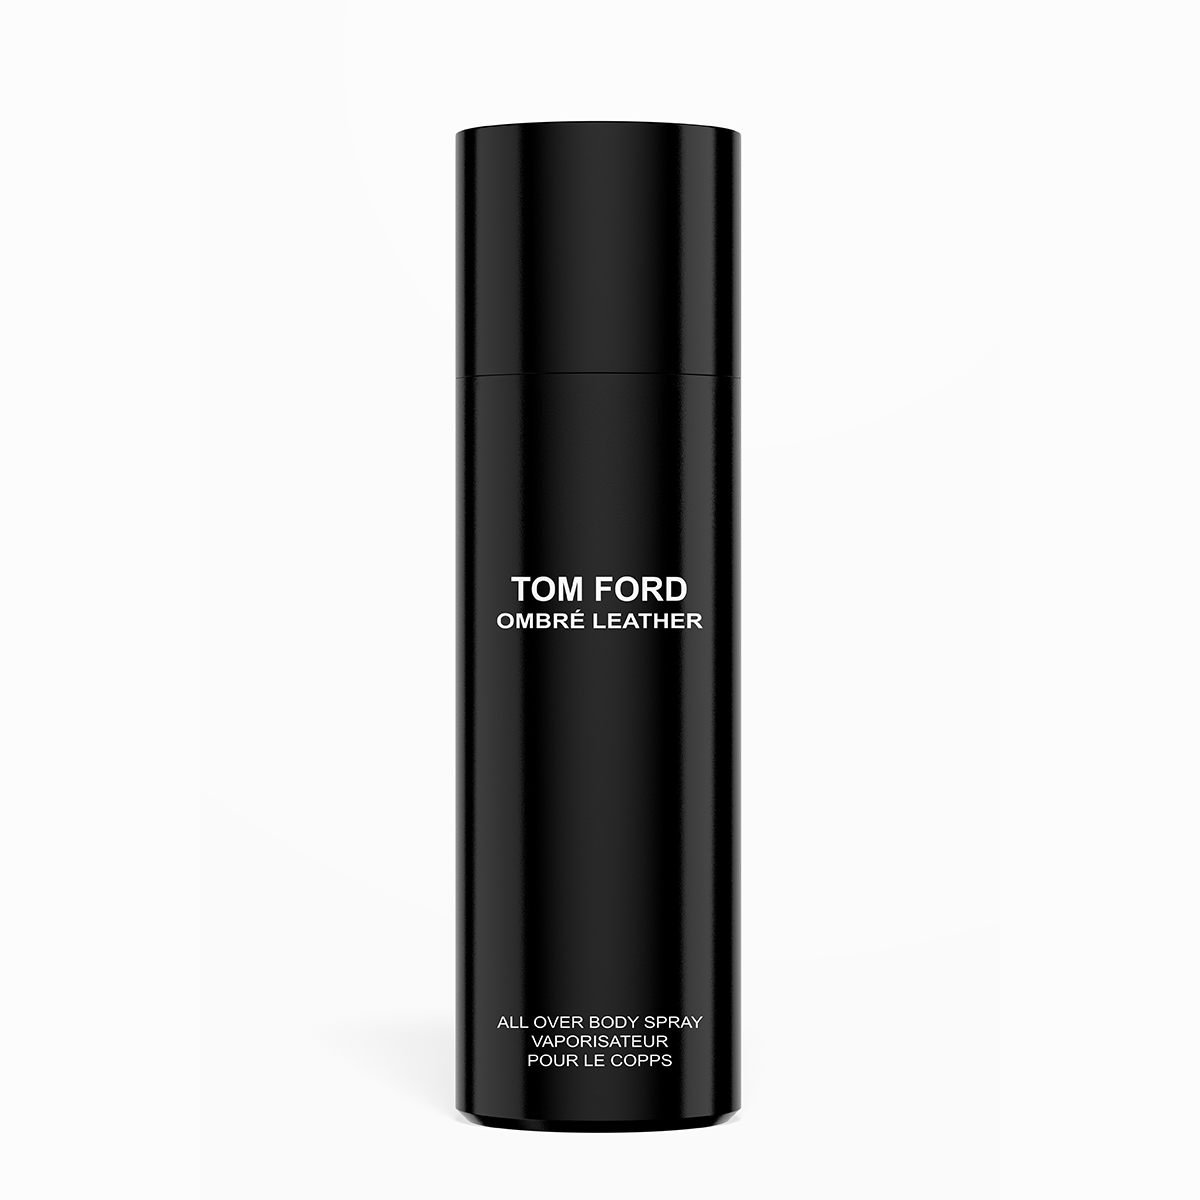 DUTY FREE BODY SPRAY – TOM FORD OMBRE LEATHER 200ML – New Edition